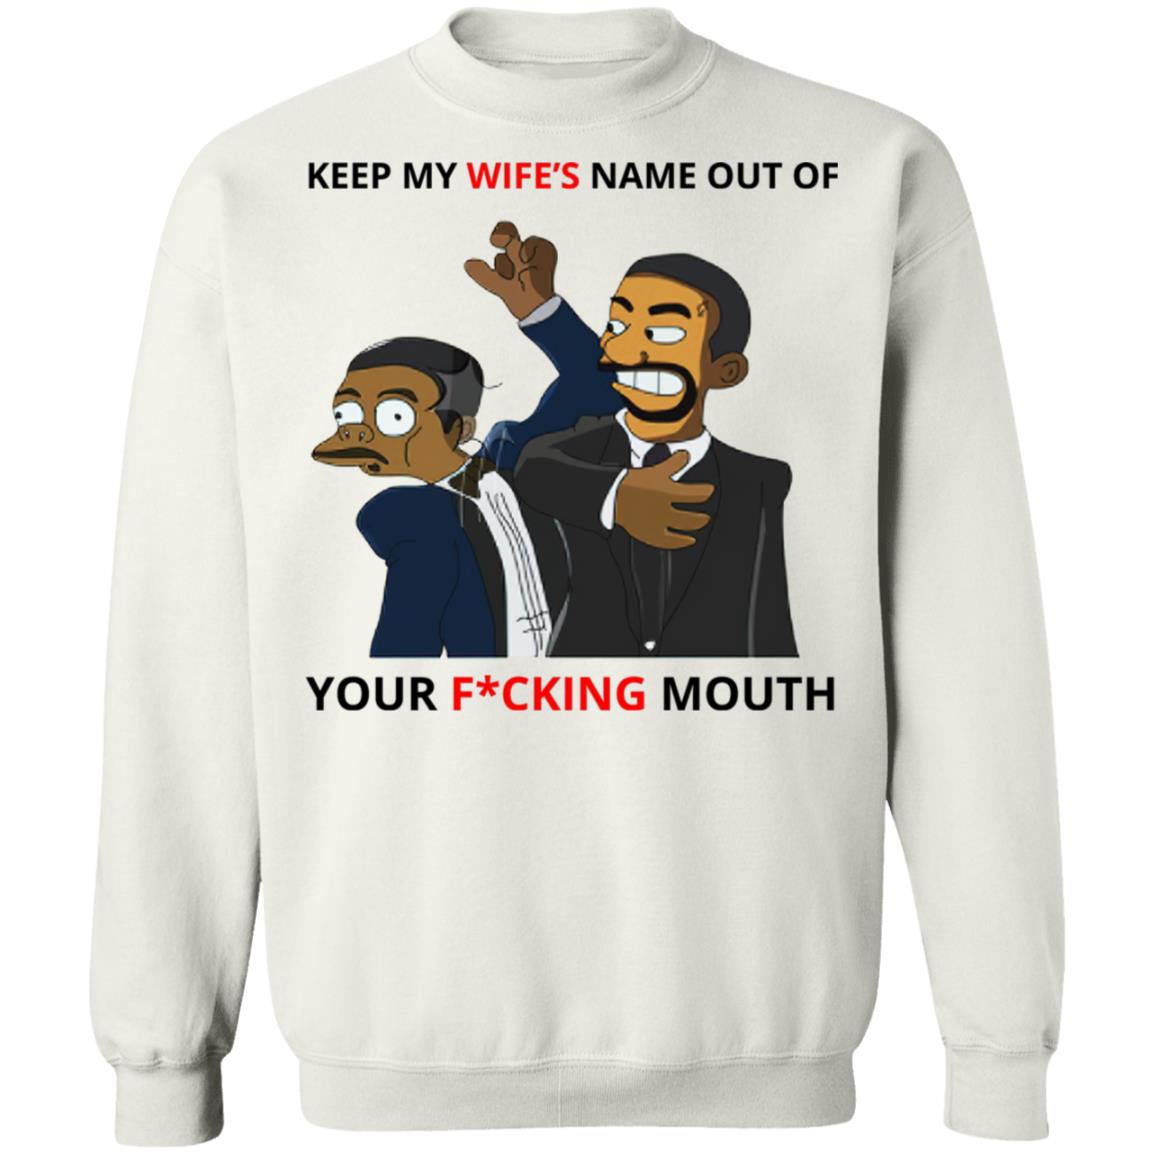 Keep My Wife’s Name Out Of Your Fucking Mouth Shirt 2